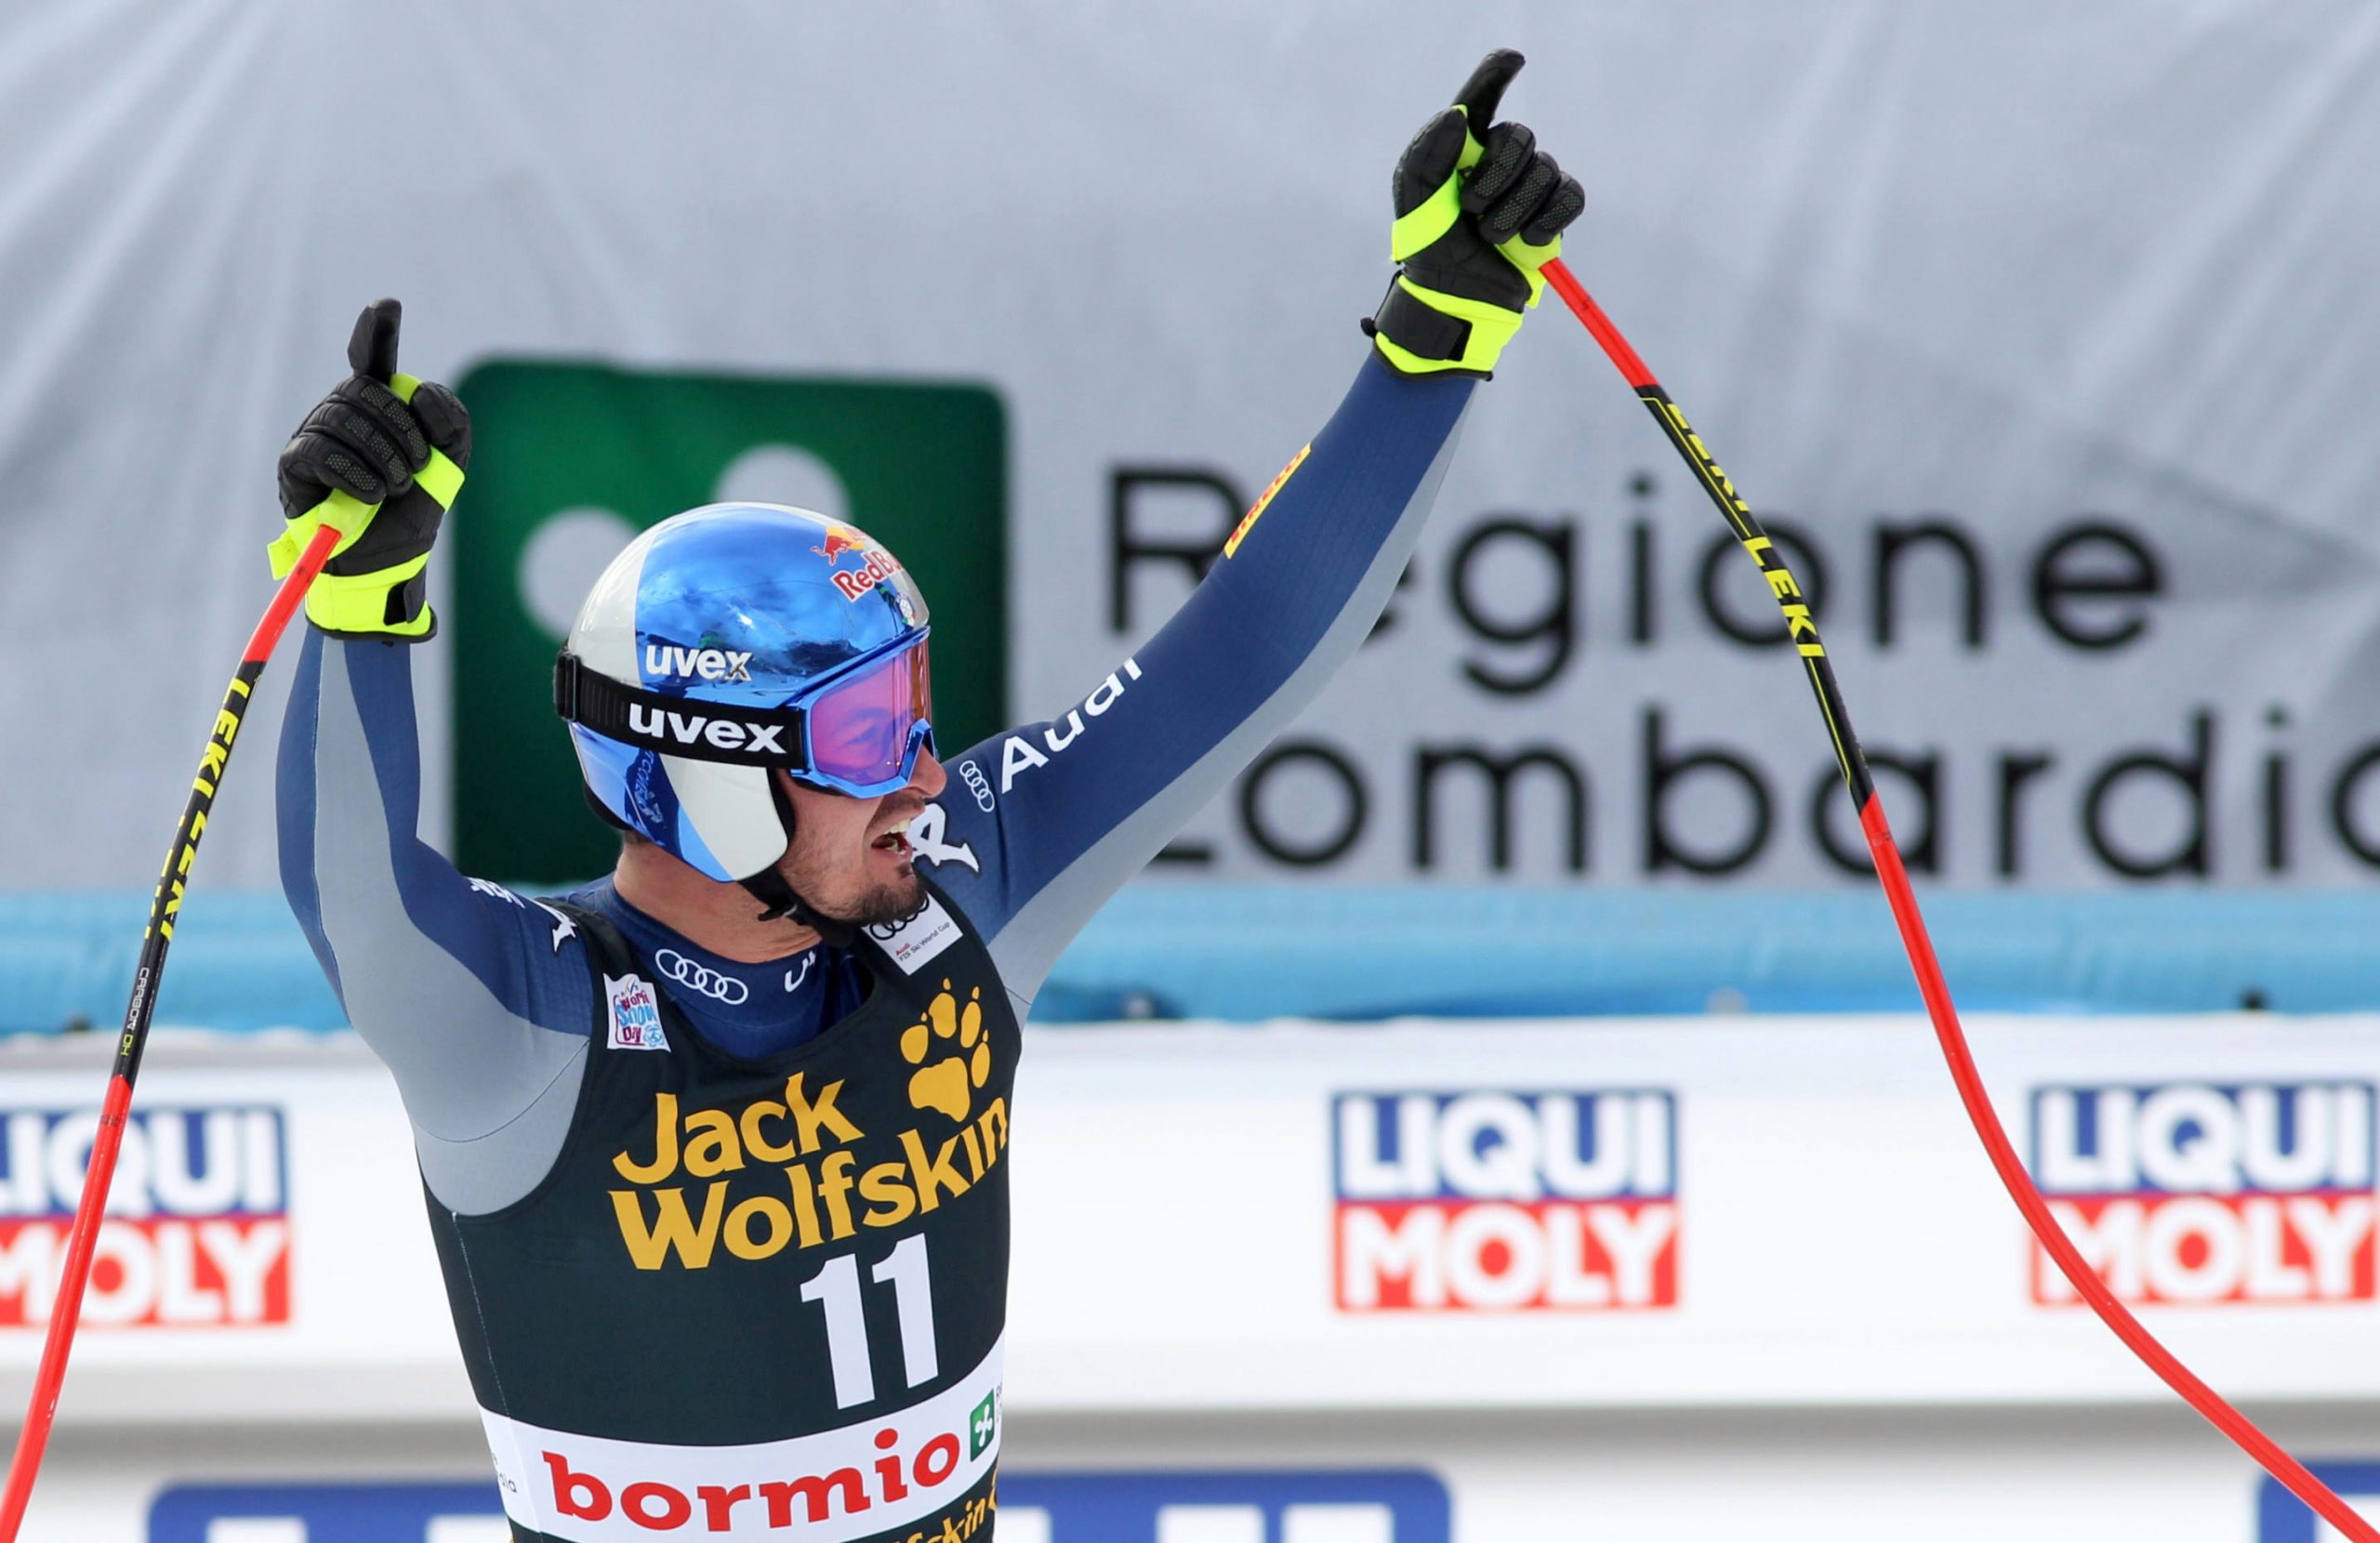 epa08092036 Dominik Paris of Italy celebrates in the finish area after winning the Men's Downhill at the FIS Alpine Skiing World Cup in Bormio, Italy,27 December 2019.  EPA/FELICE CALABRO